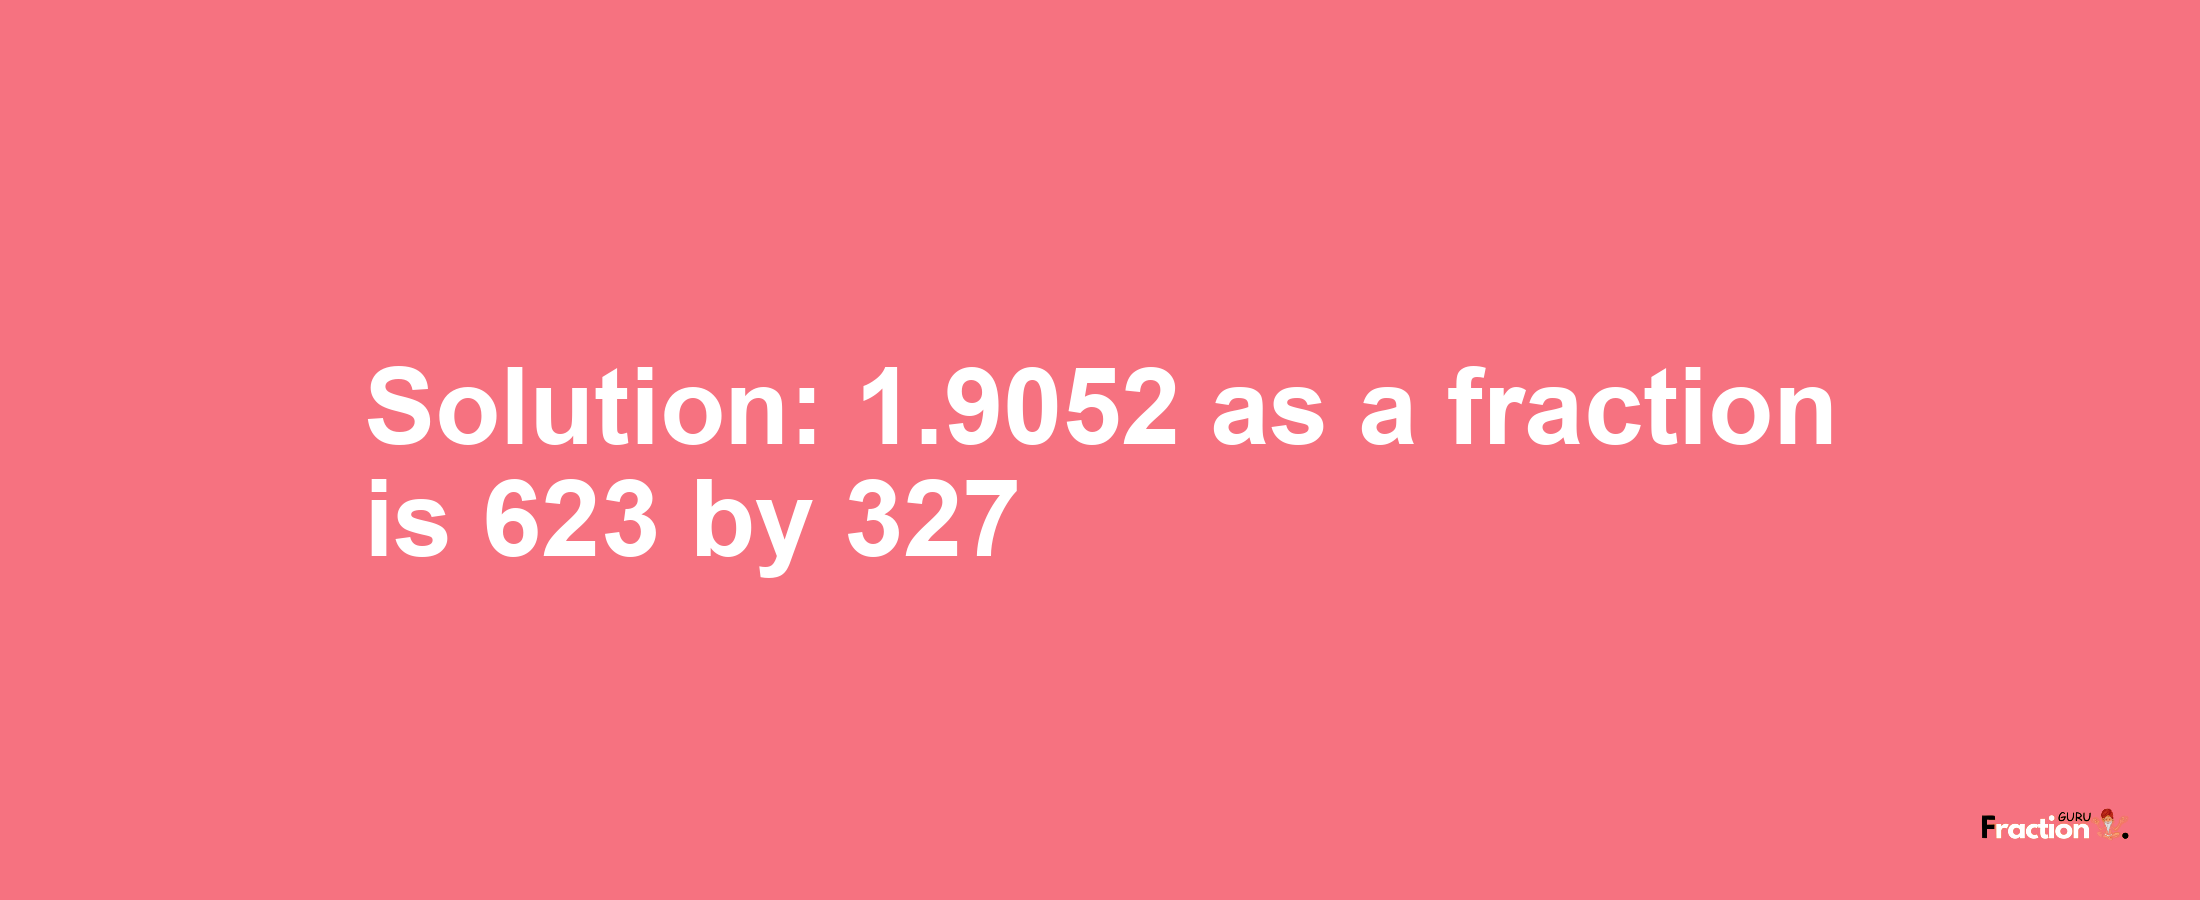 Solution:1.9052 as a fraction is 623/327